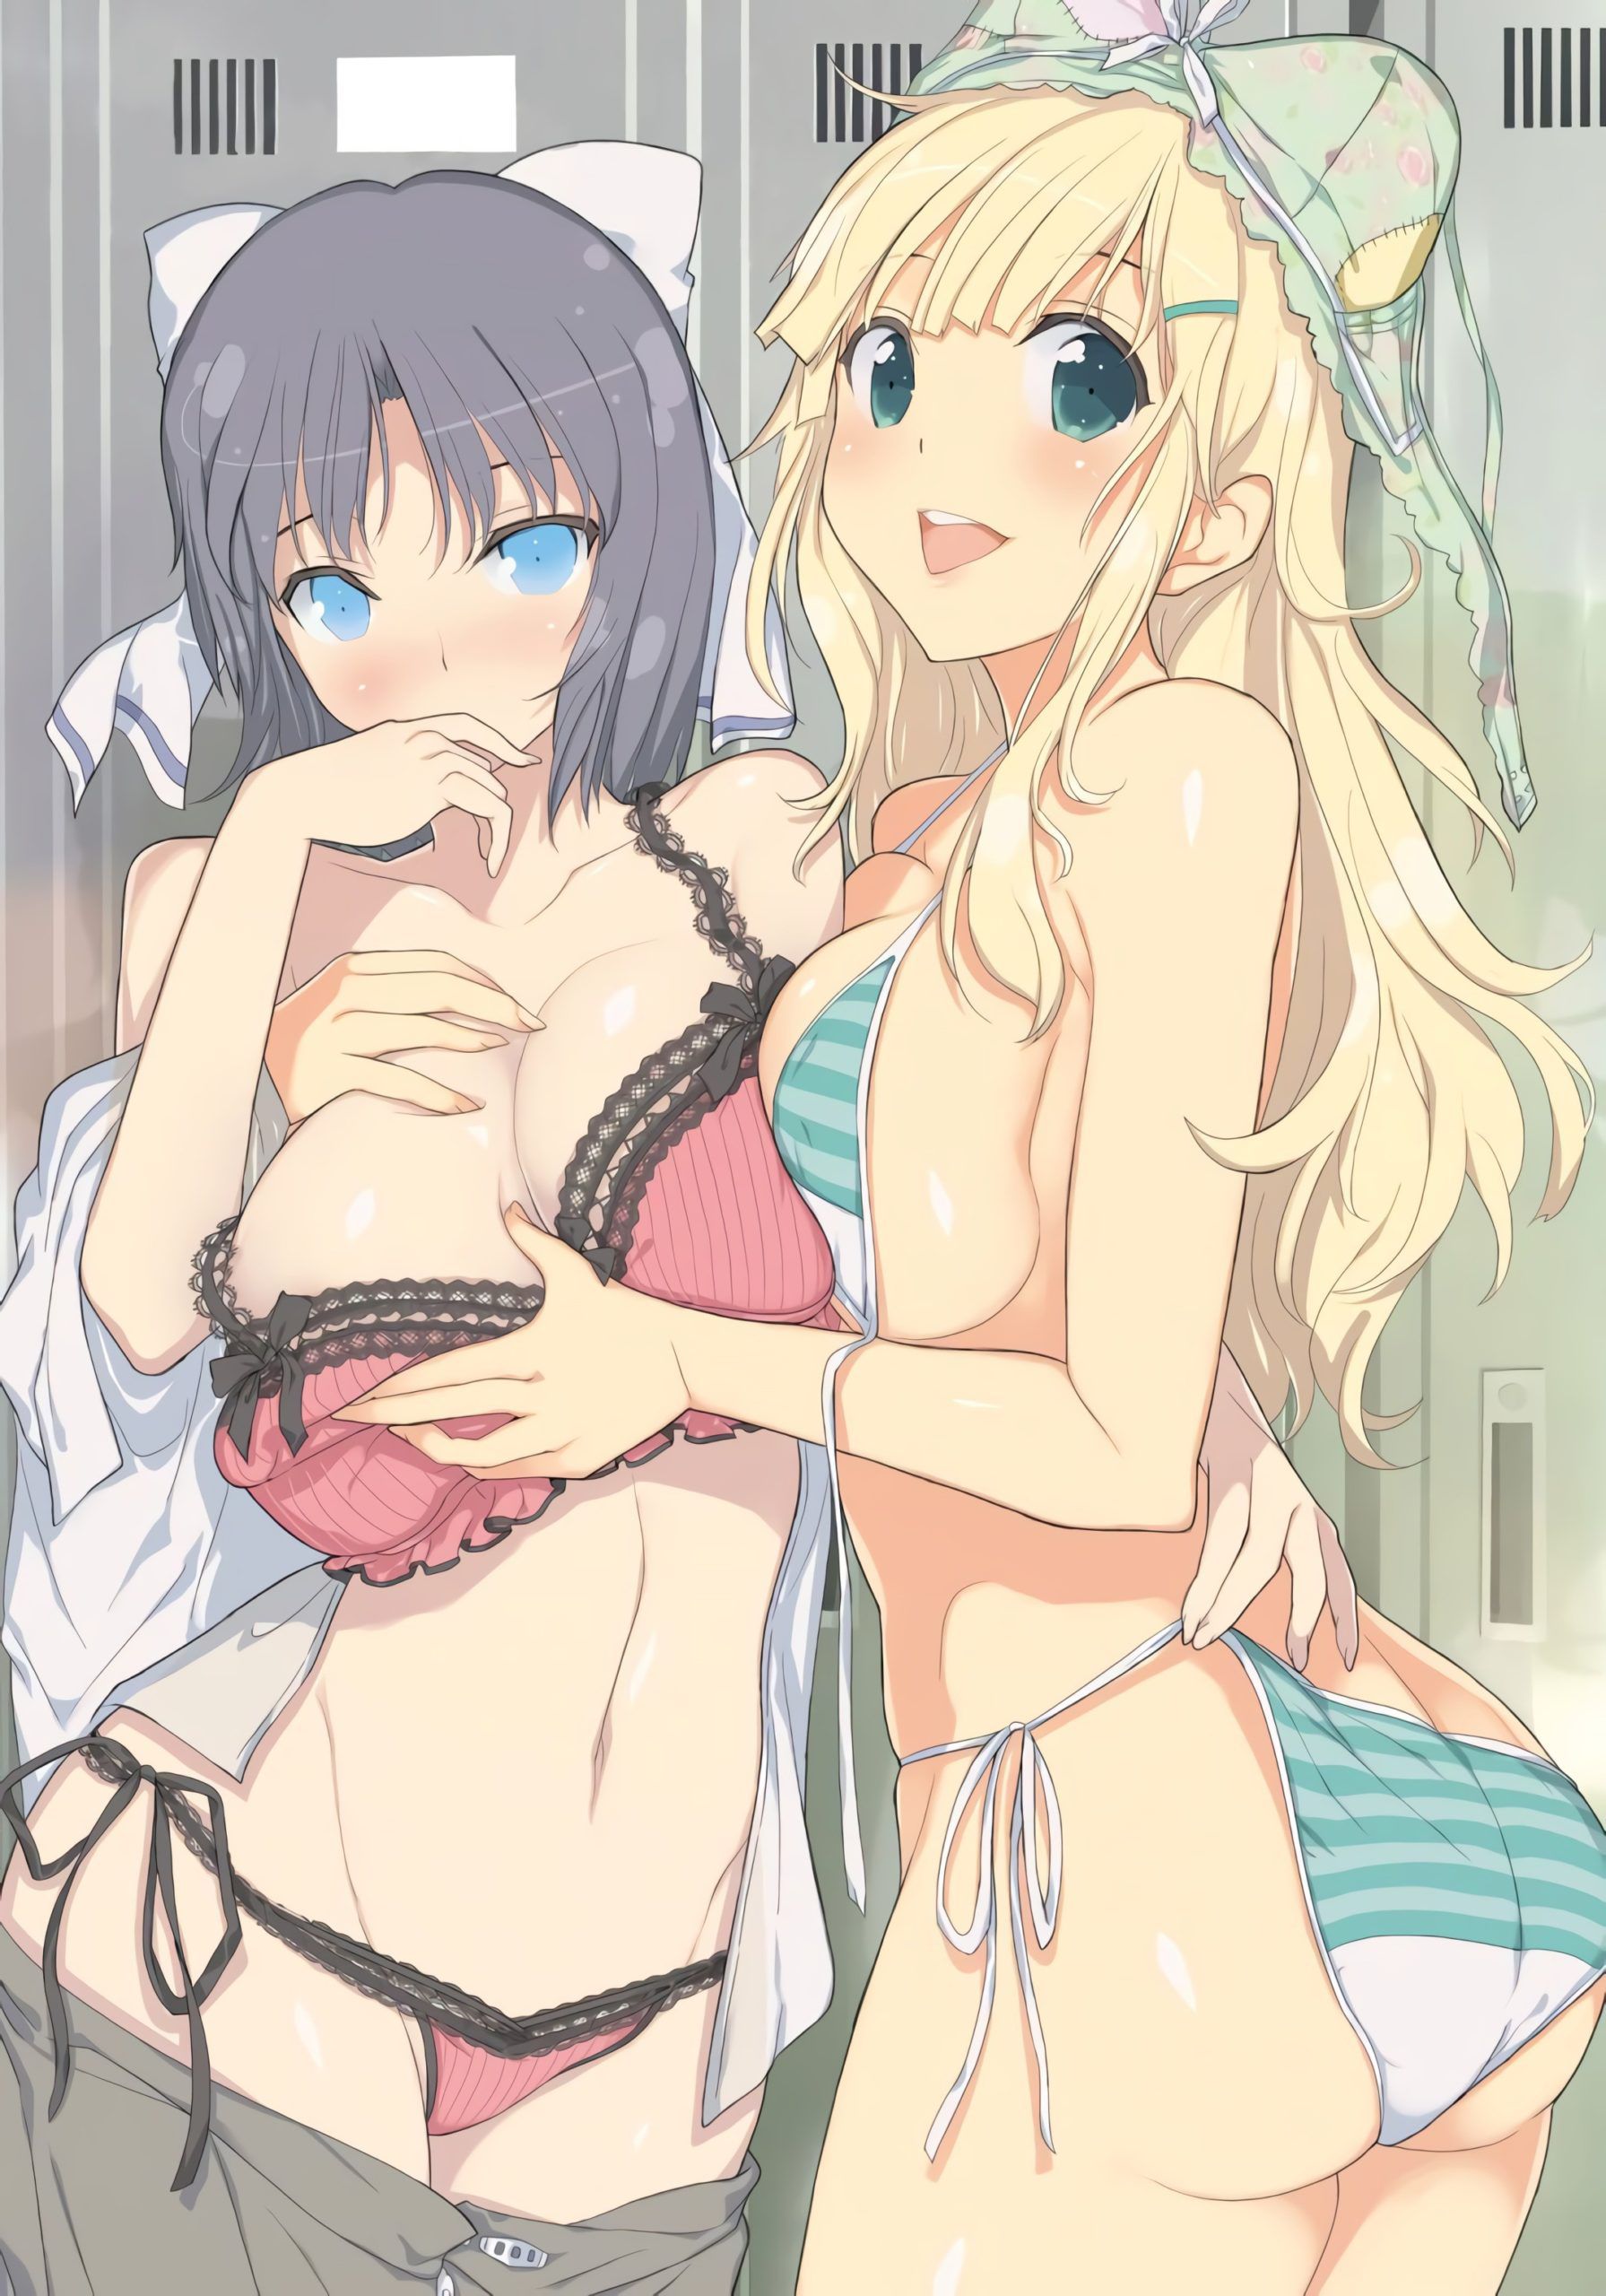 I envy you. Mix me too! Yuri two-dimensional erotic image between girls who are relentless in Lezplay 5